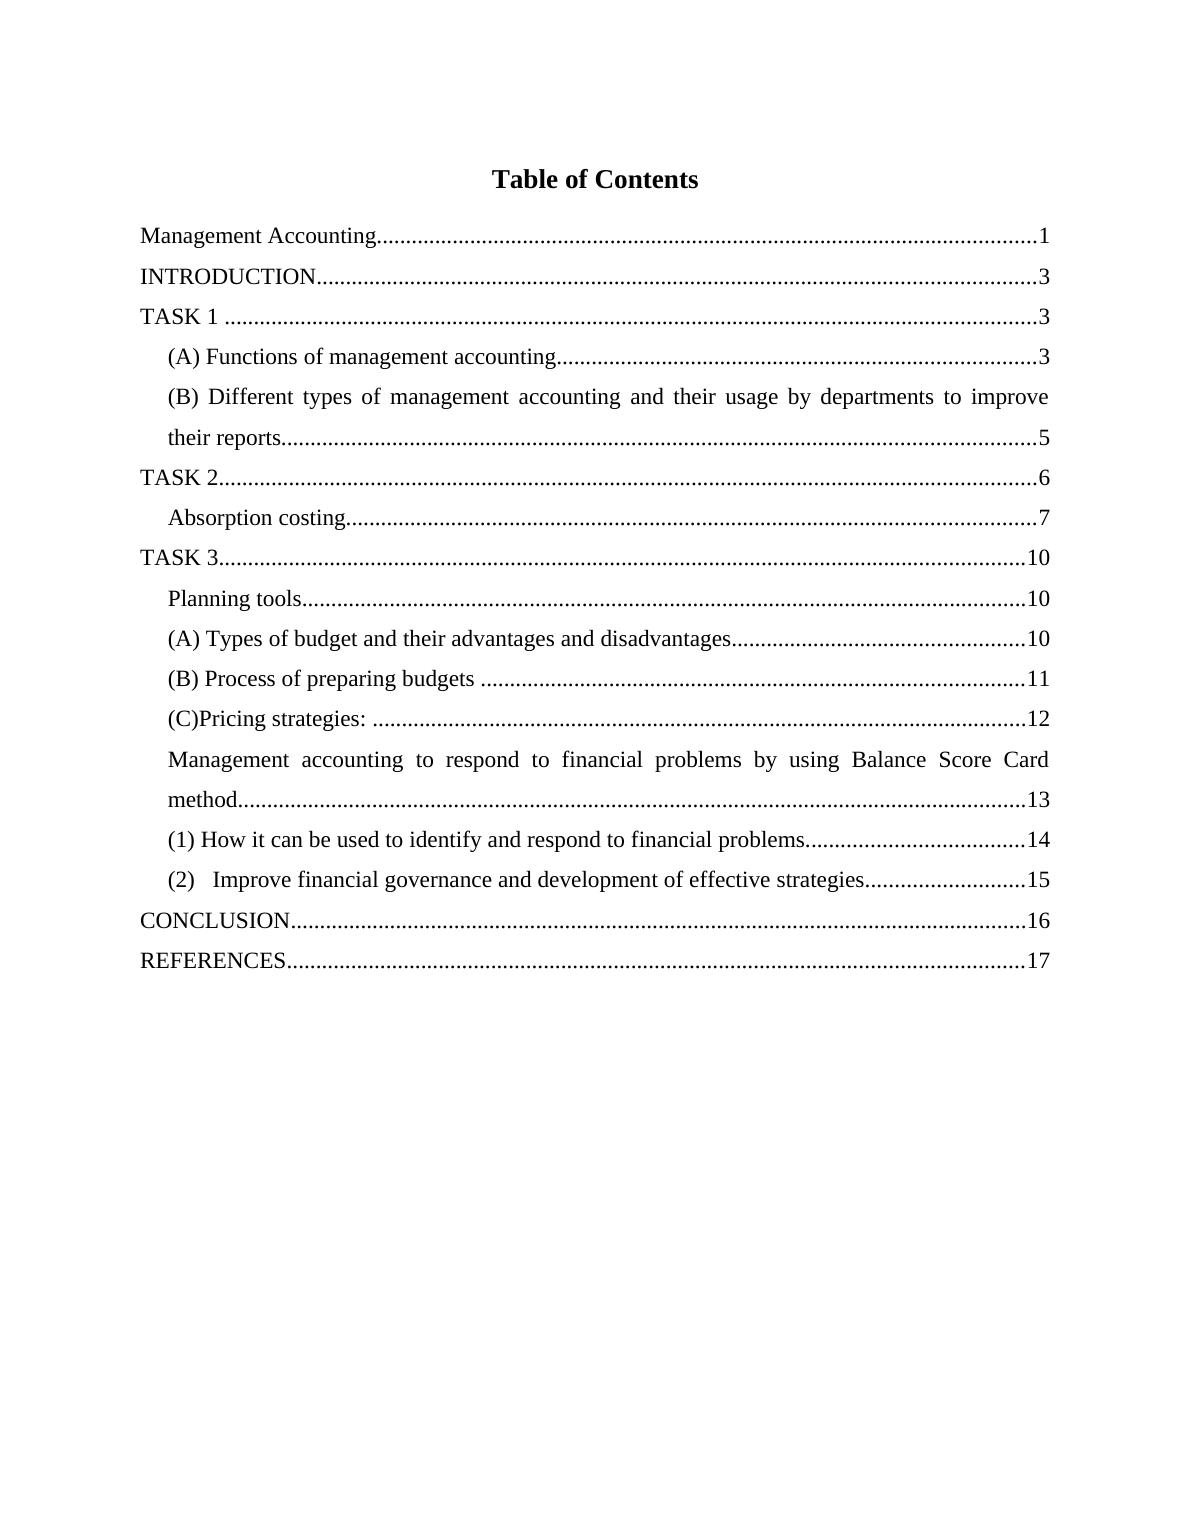 Research Report on Management Accounting_2